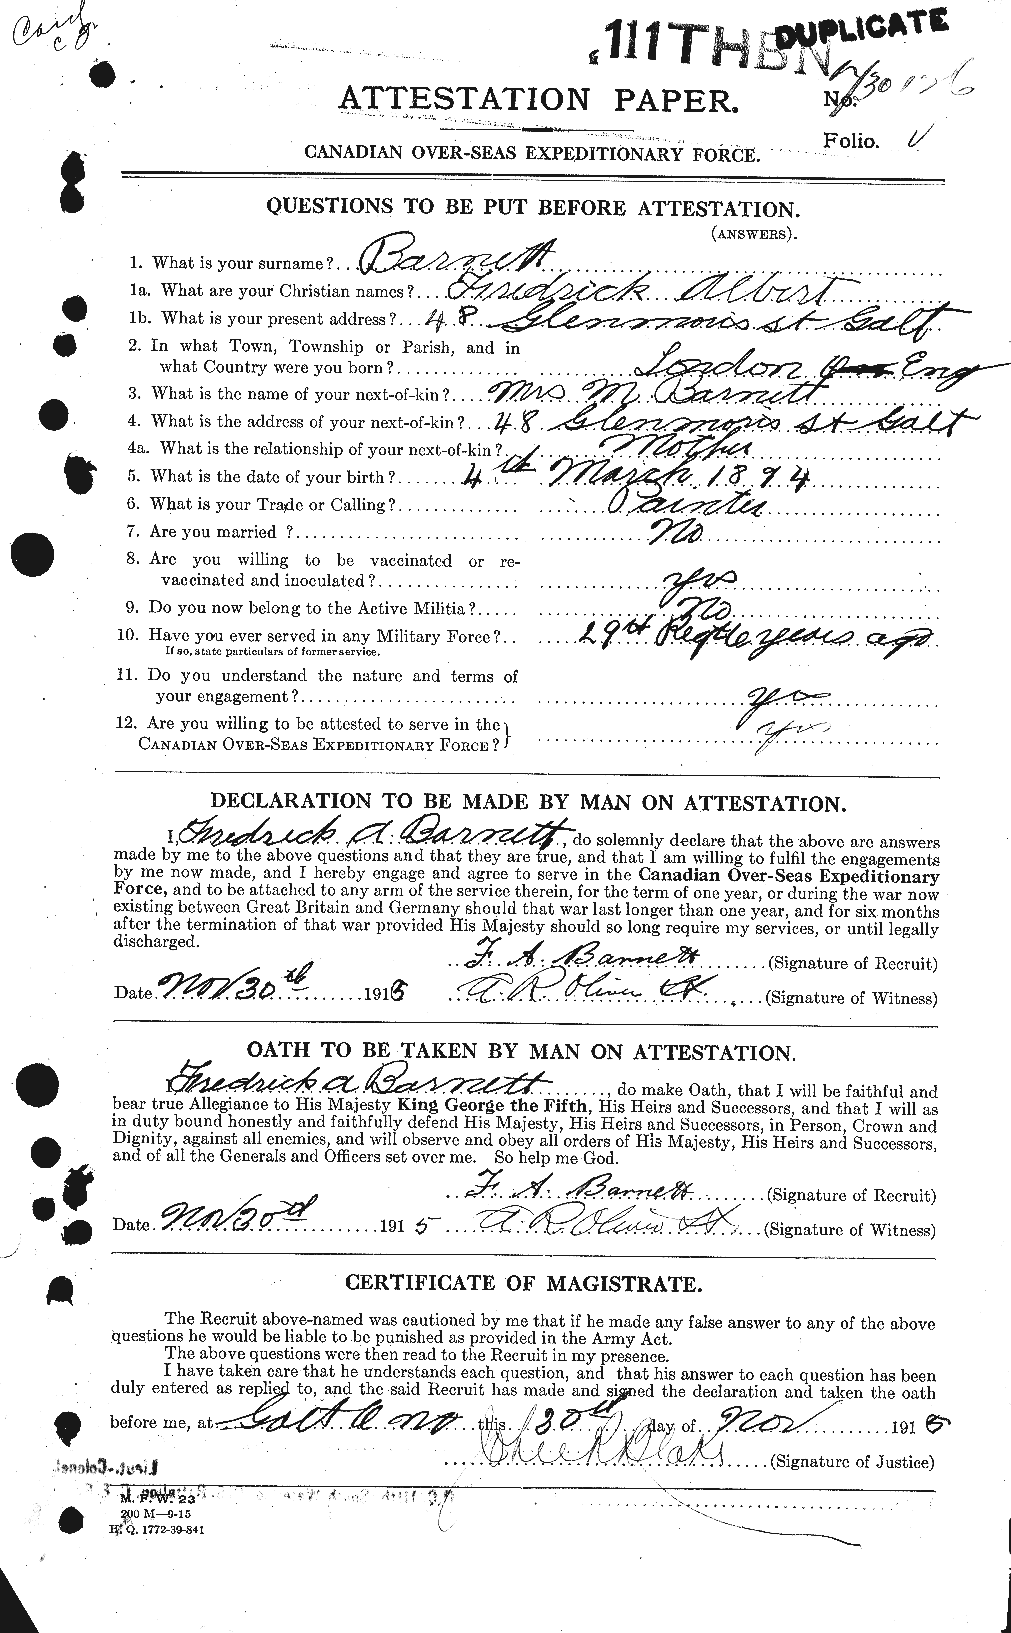 Personnel Records of the First World War - CEF 222973a